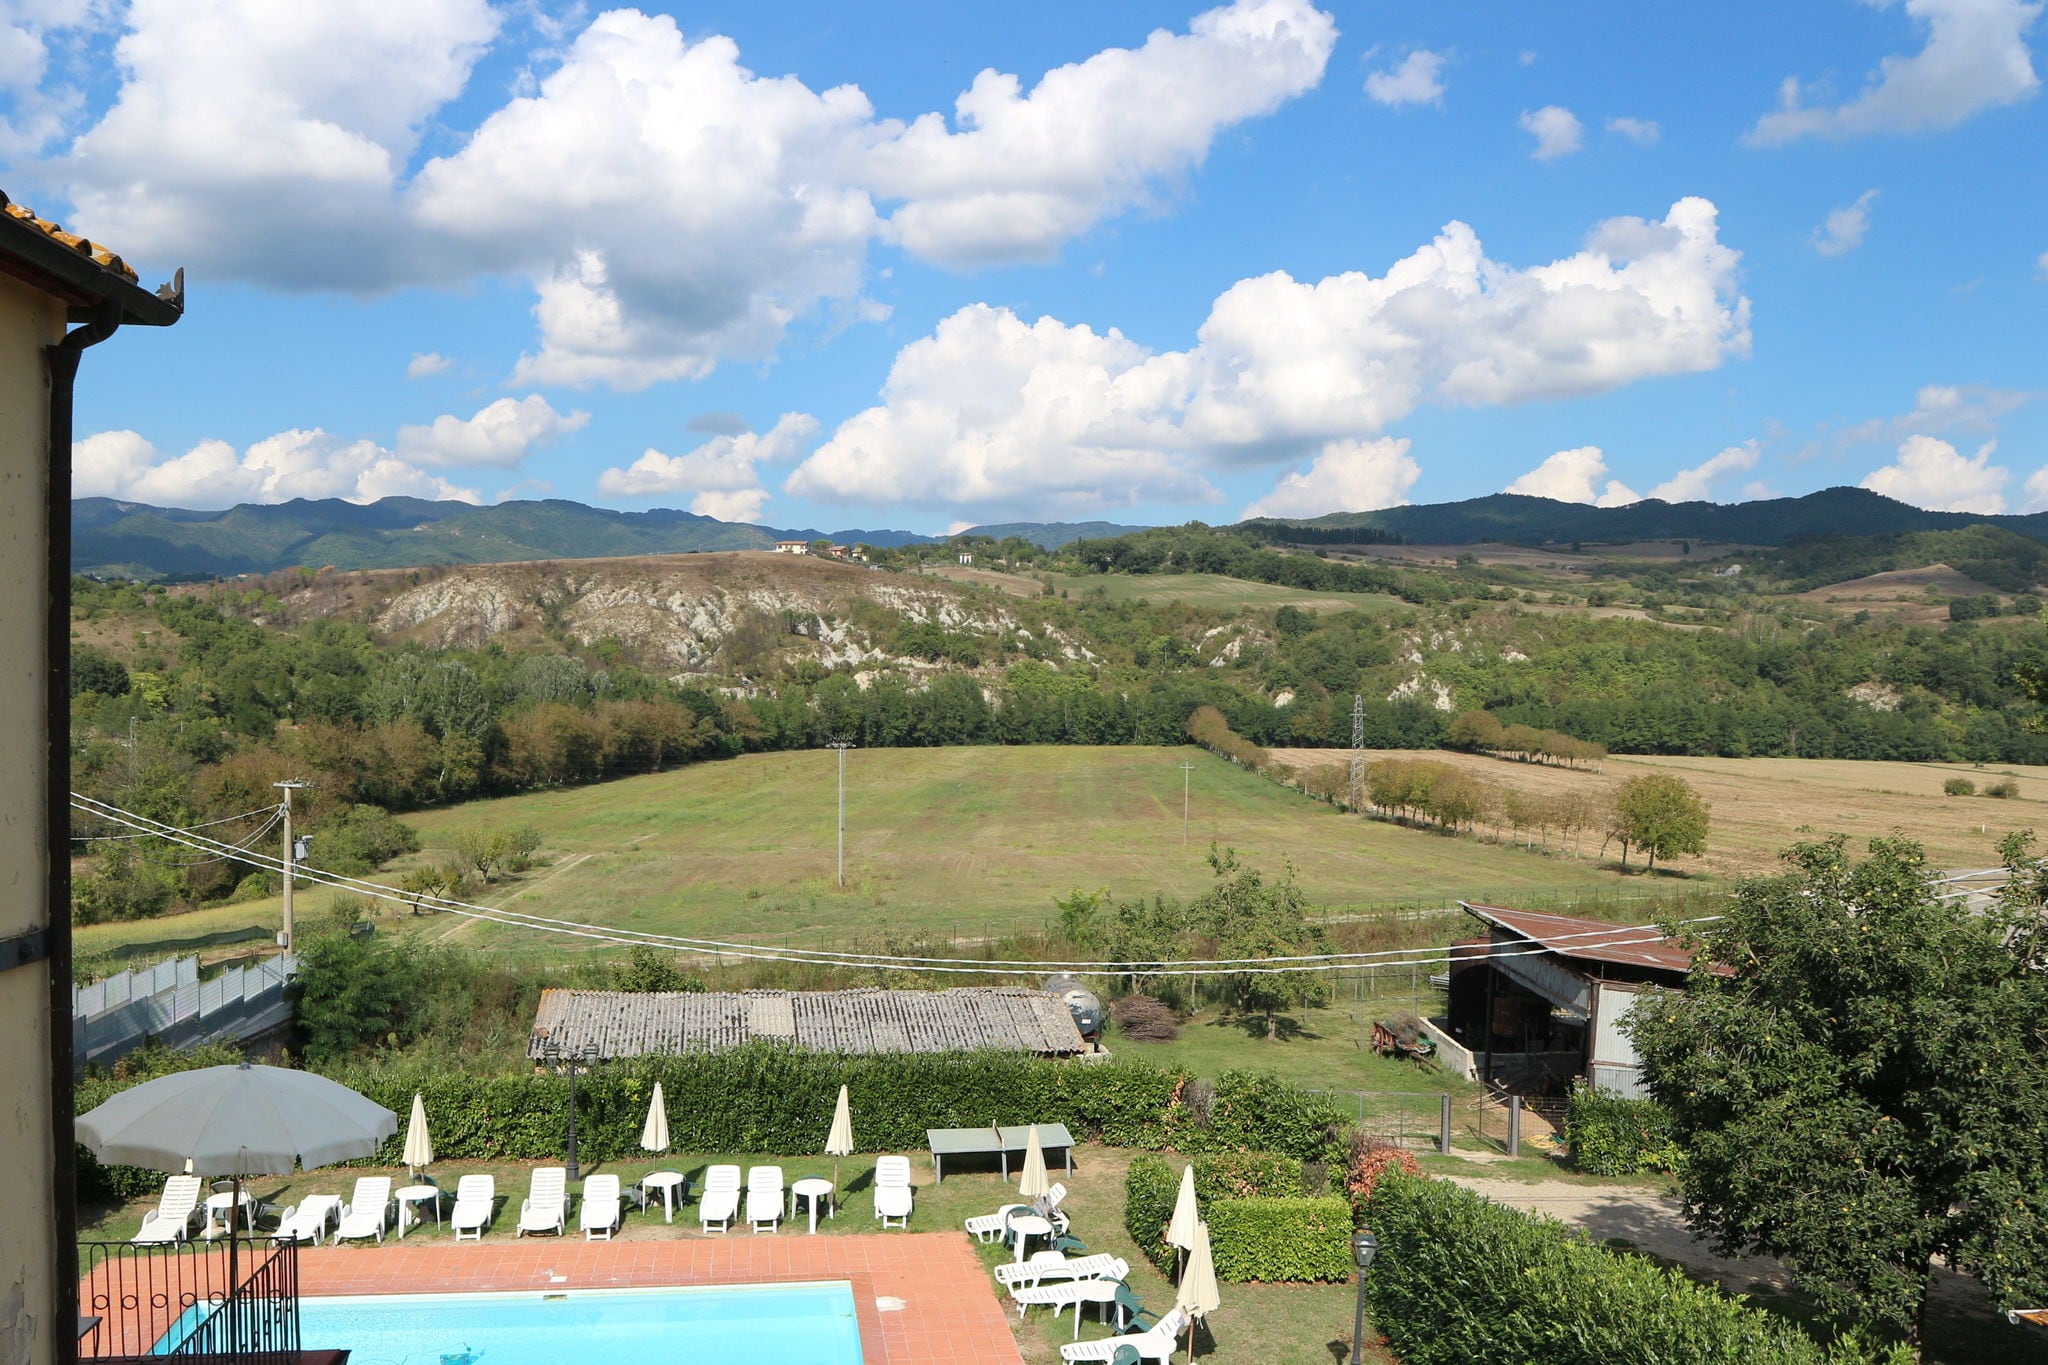 Charming Villa in Vicchio Tuscany with swimming pool